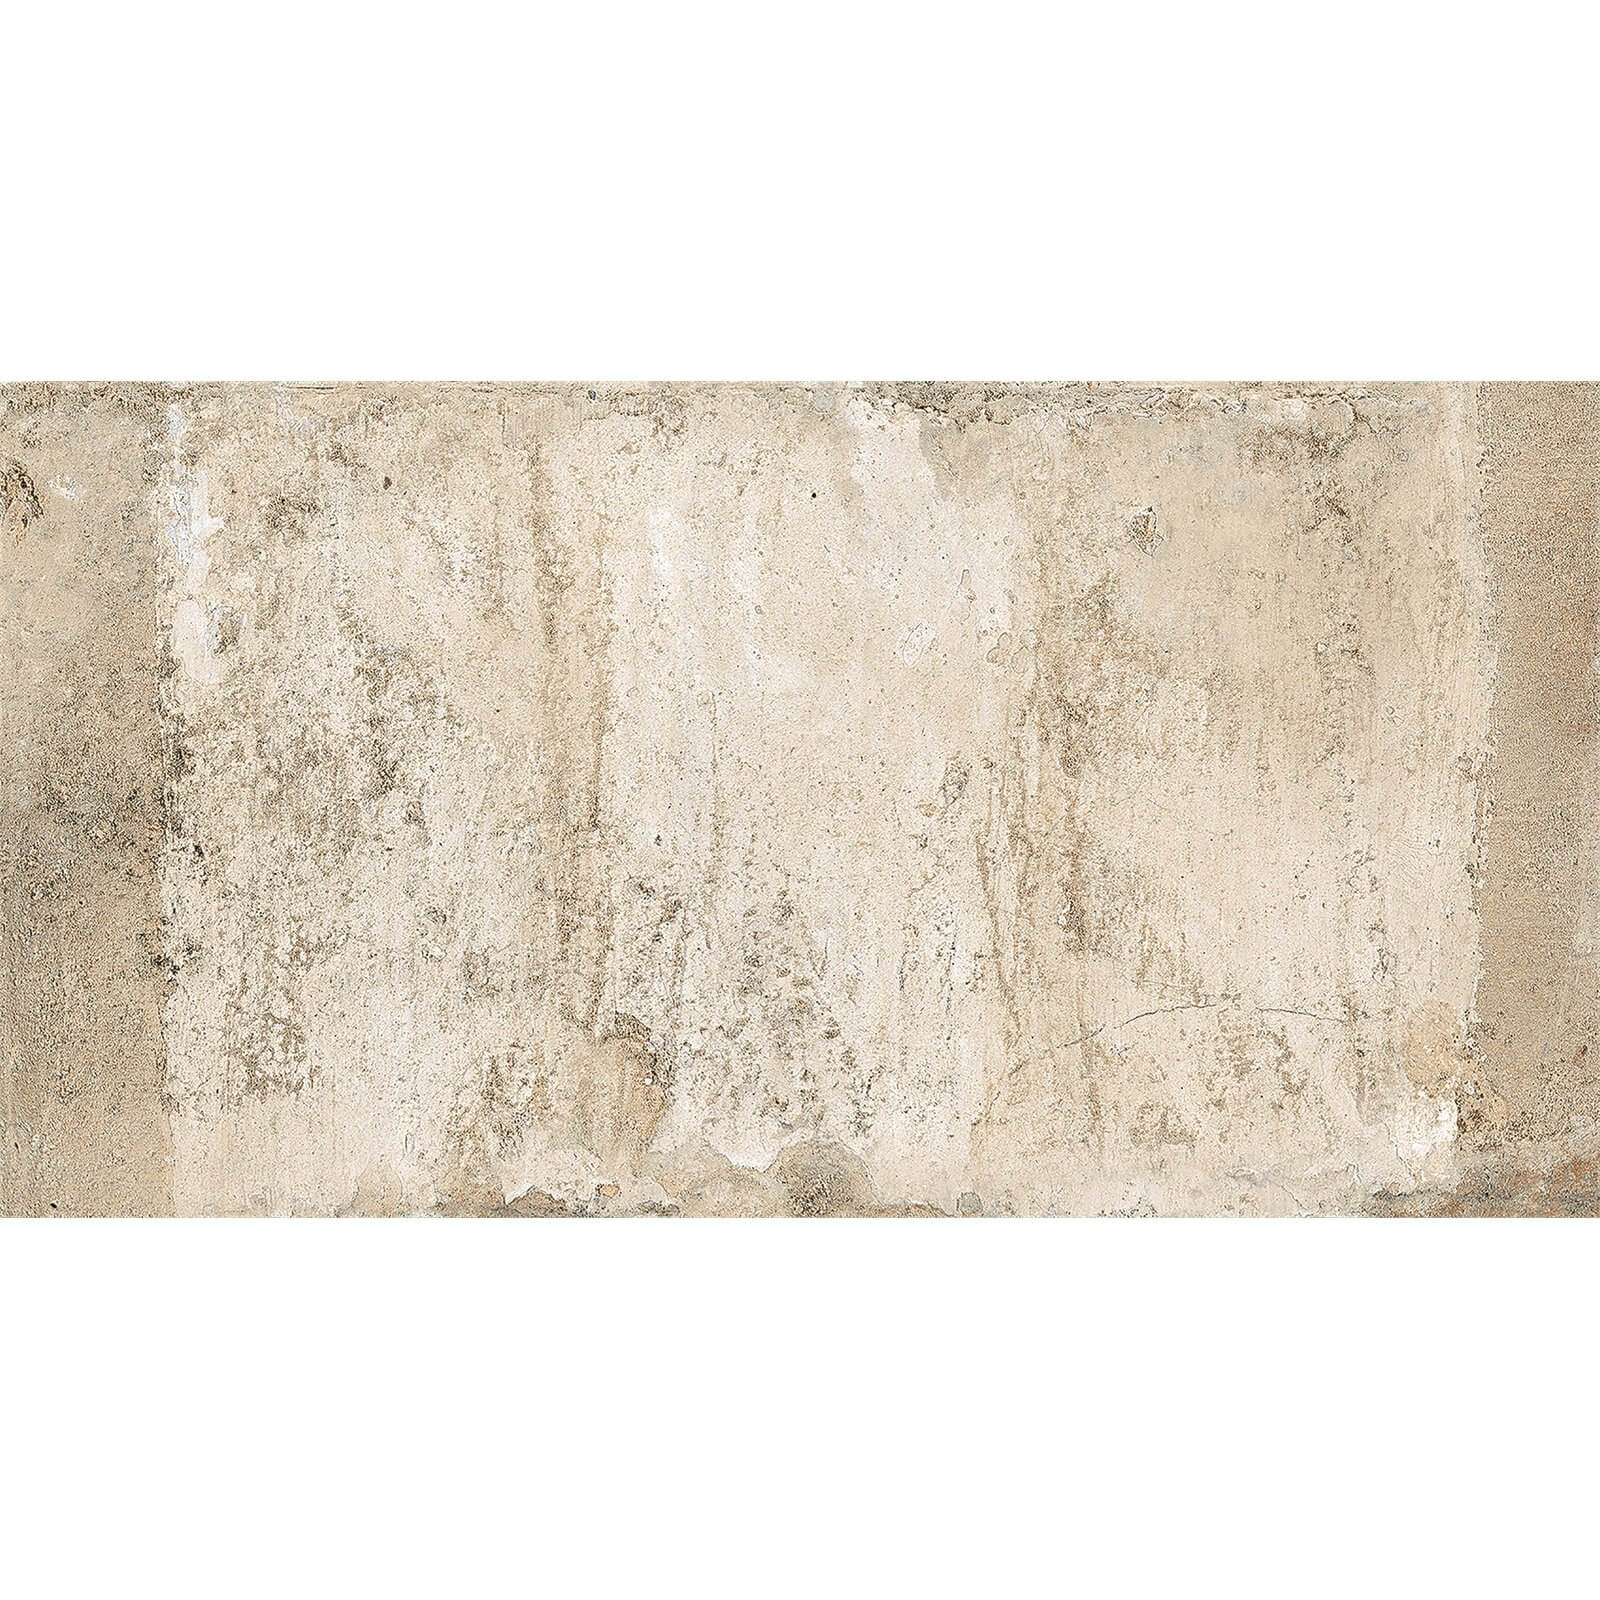 Harad Cotto Wall & Floor Tile - 600 x 300mm